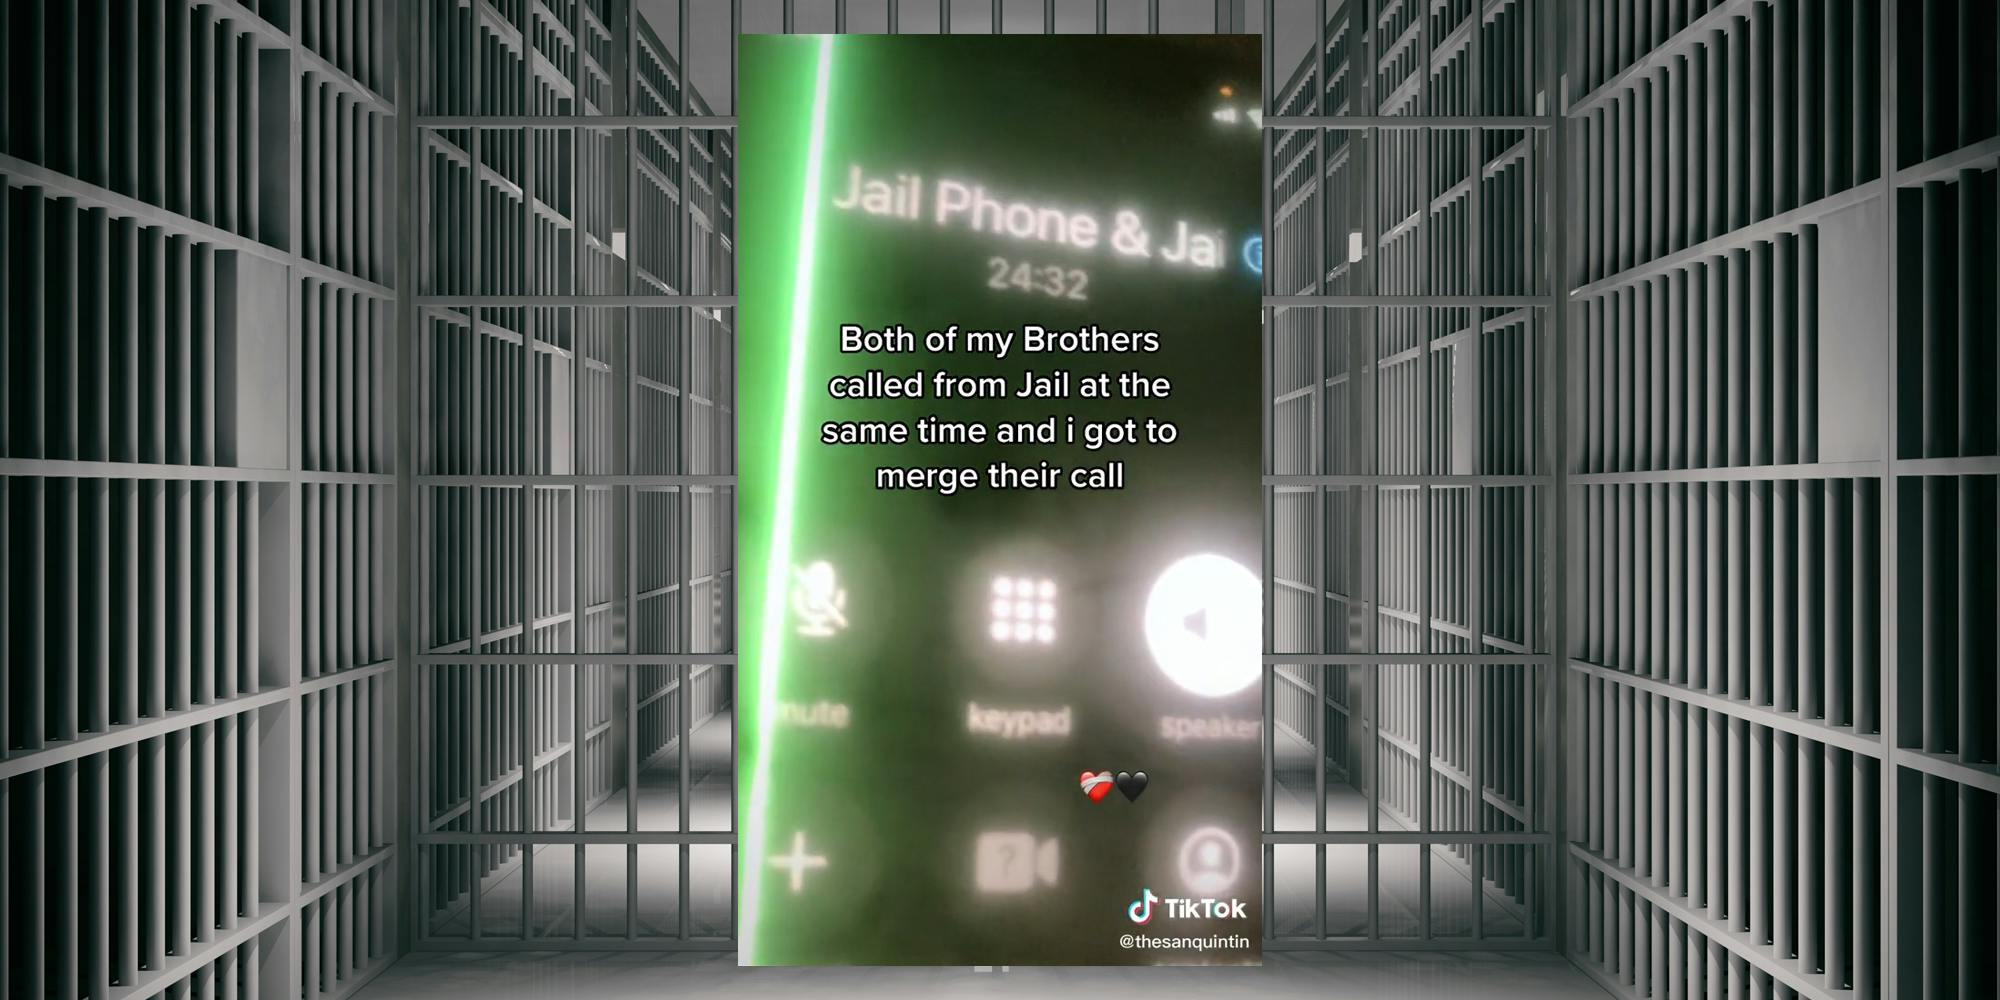 prison with inset of Jail Phone & Jail Phone on phone call, caption "Both of my brothers called from jail at the same time and i got to merge their call"